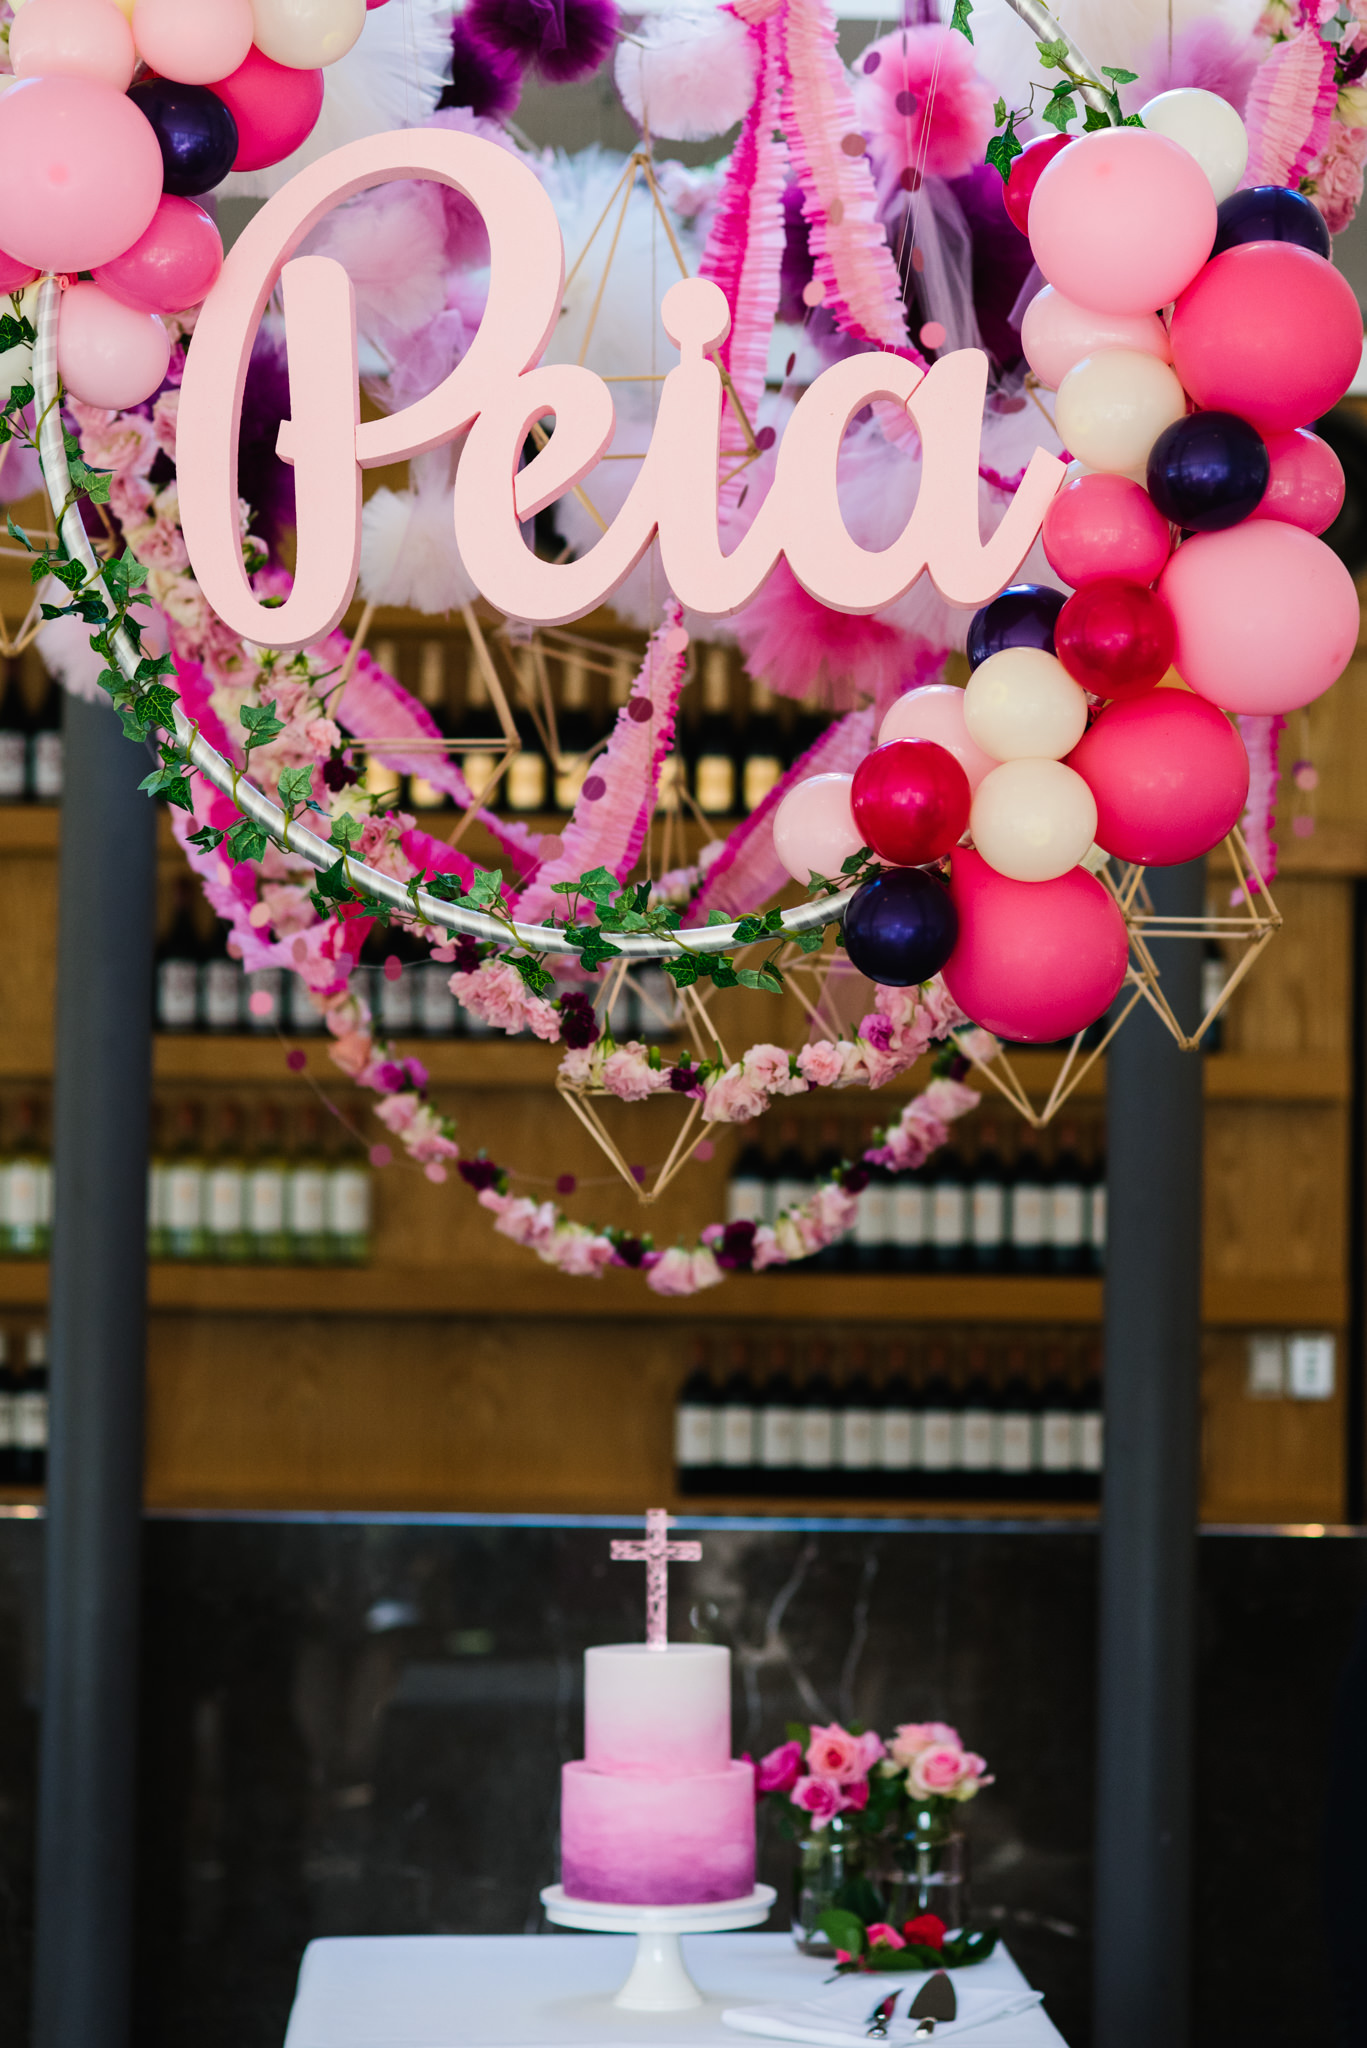 Cake table with balloons and name sign